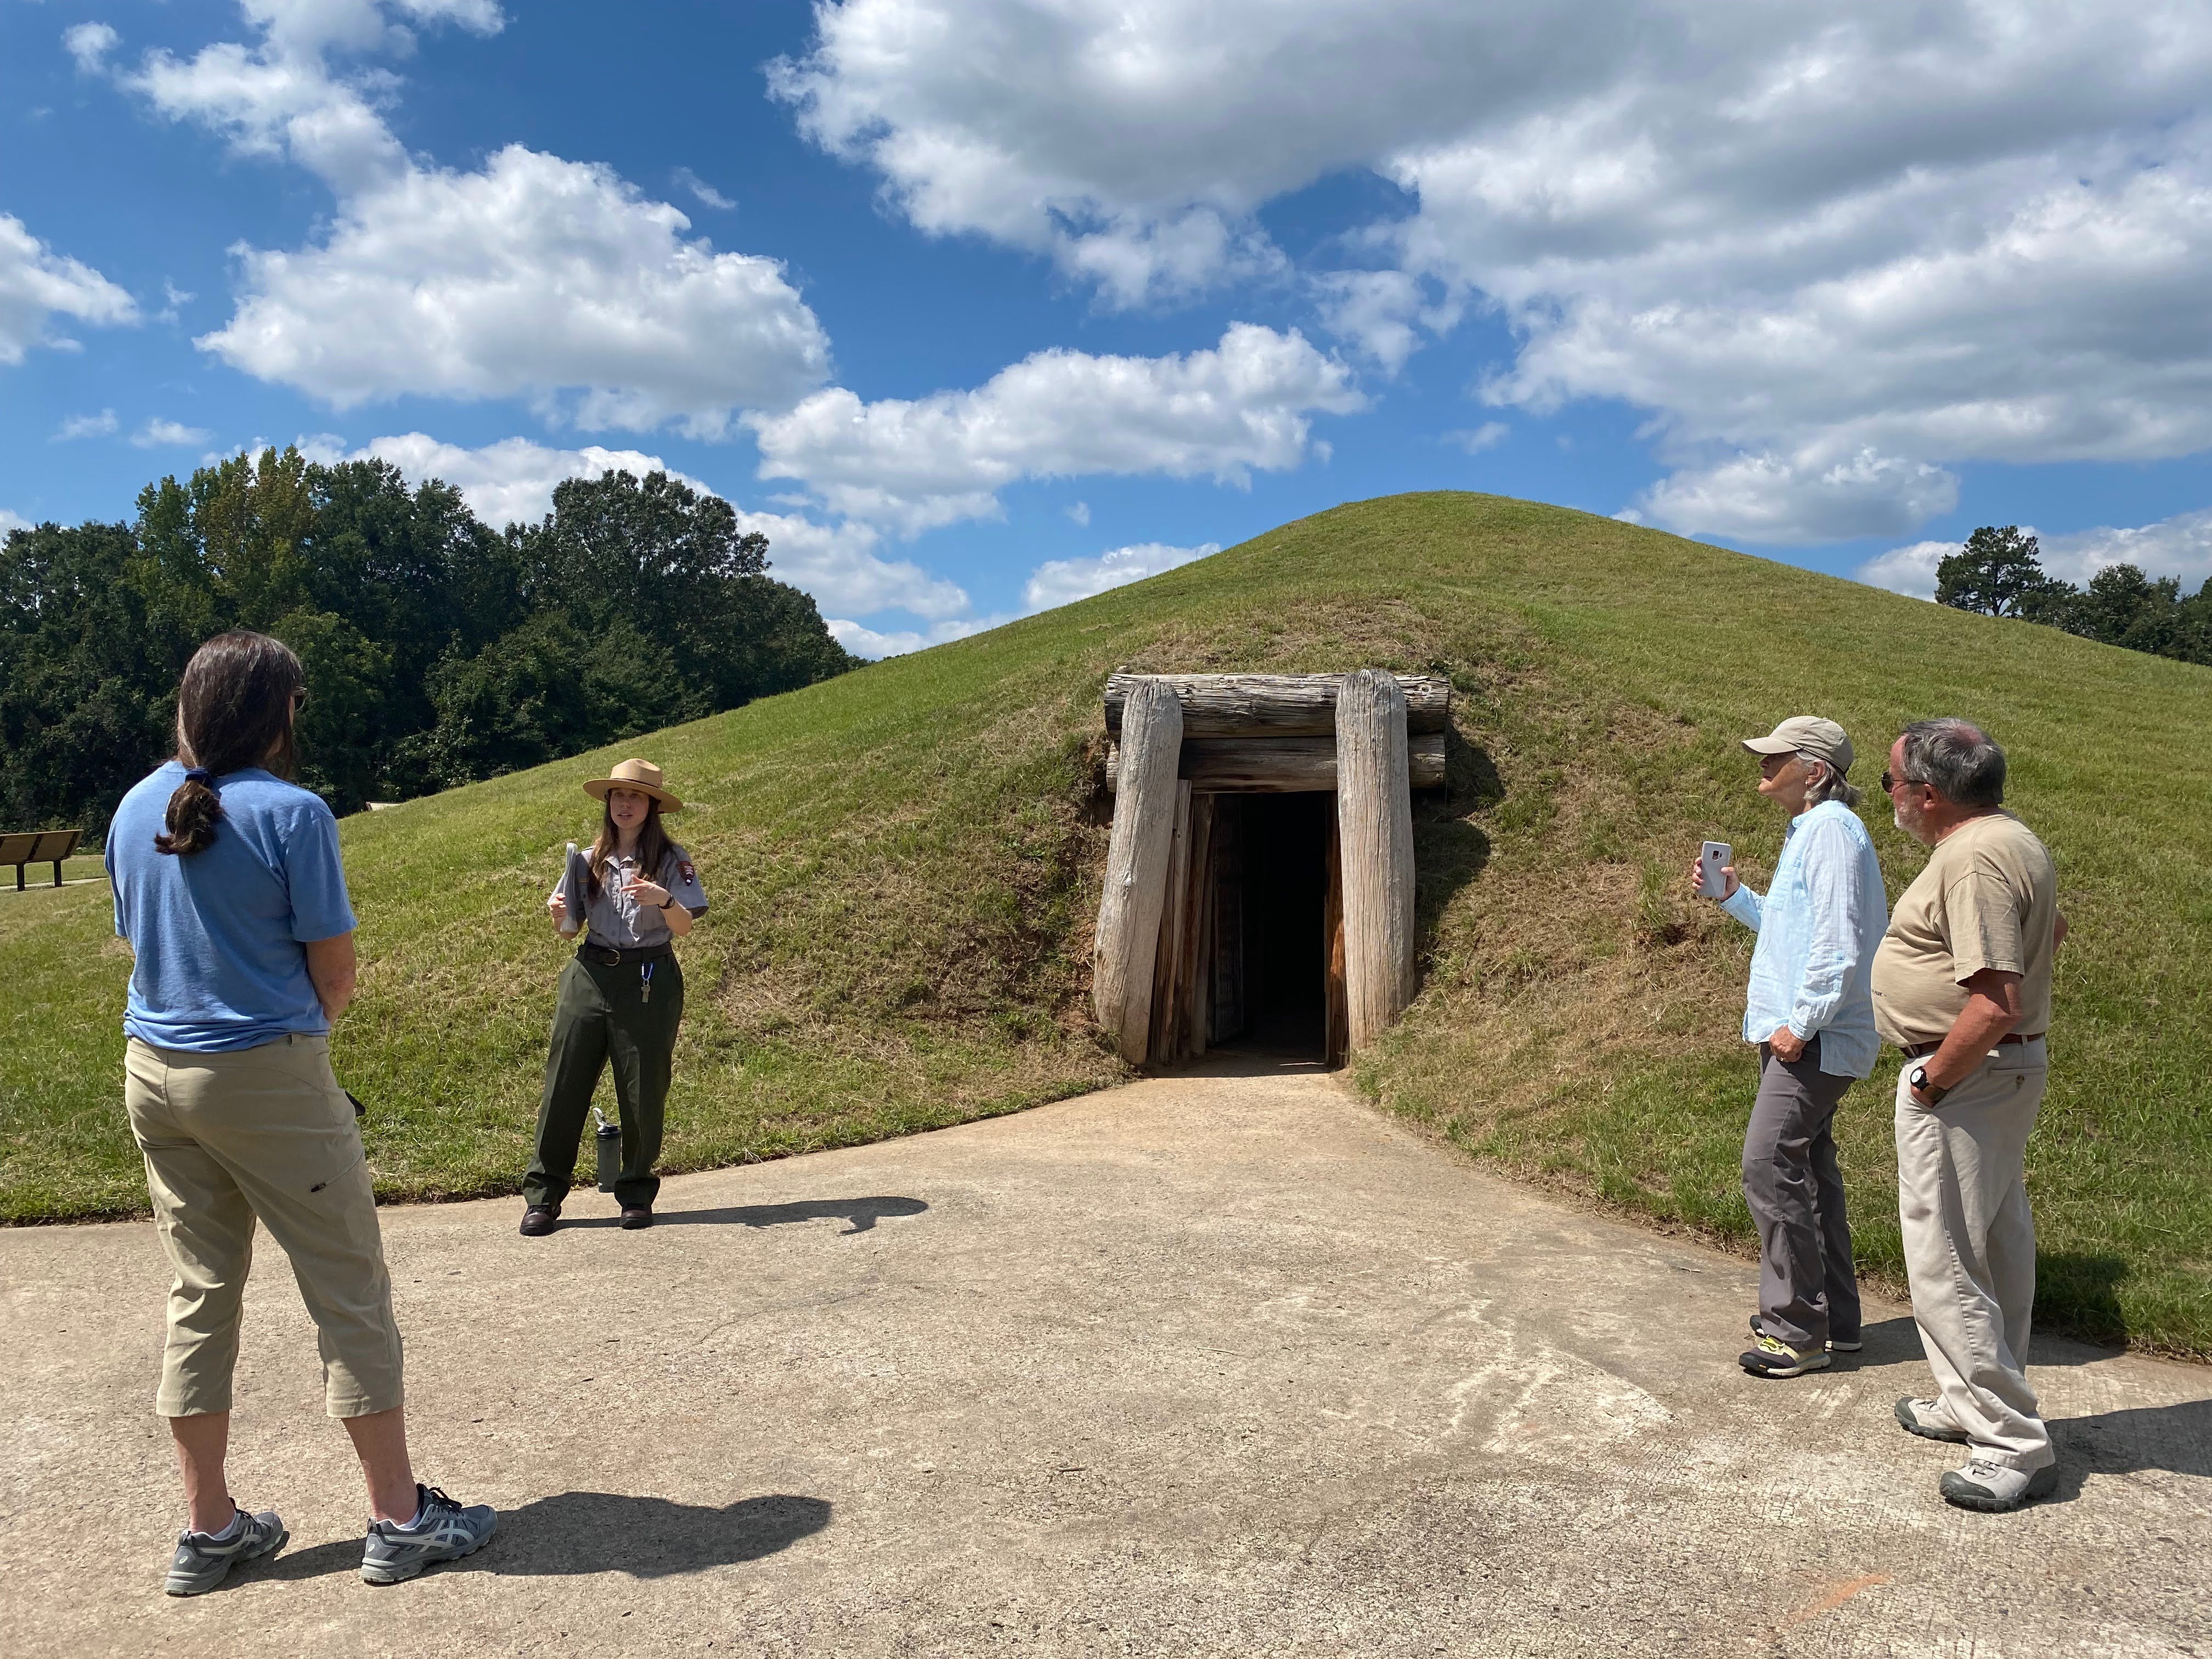 NPF and partners on a site visit to Ocmulgee Mounds National Historical Park